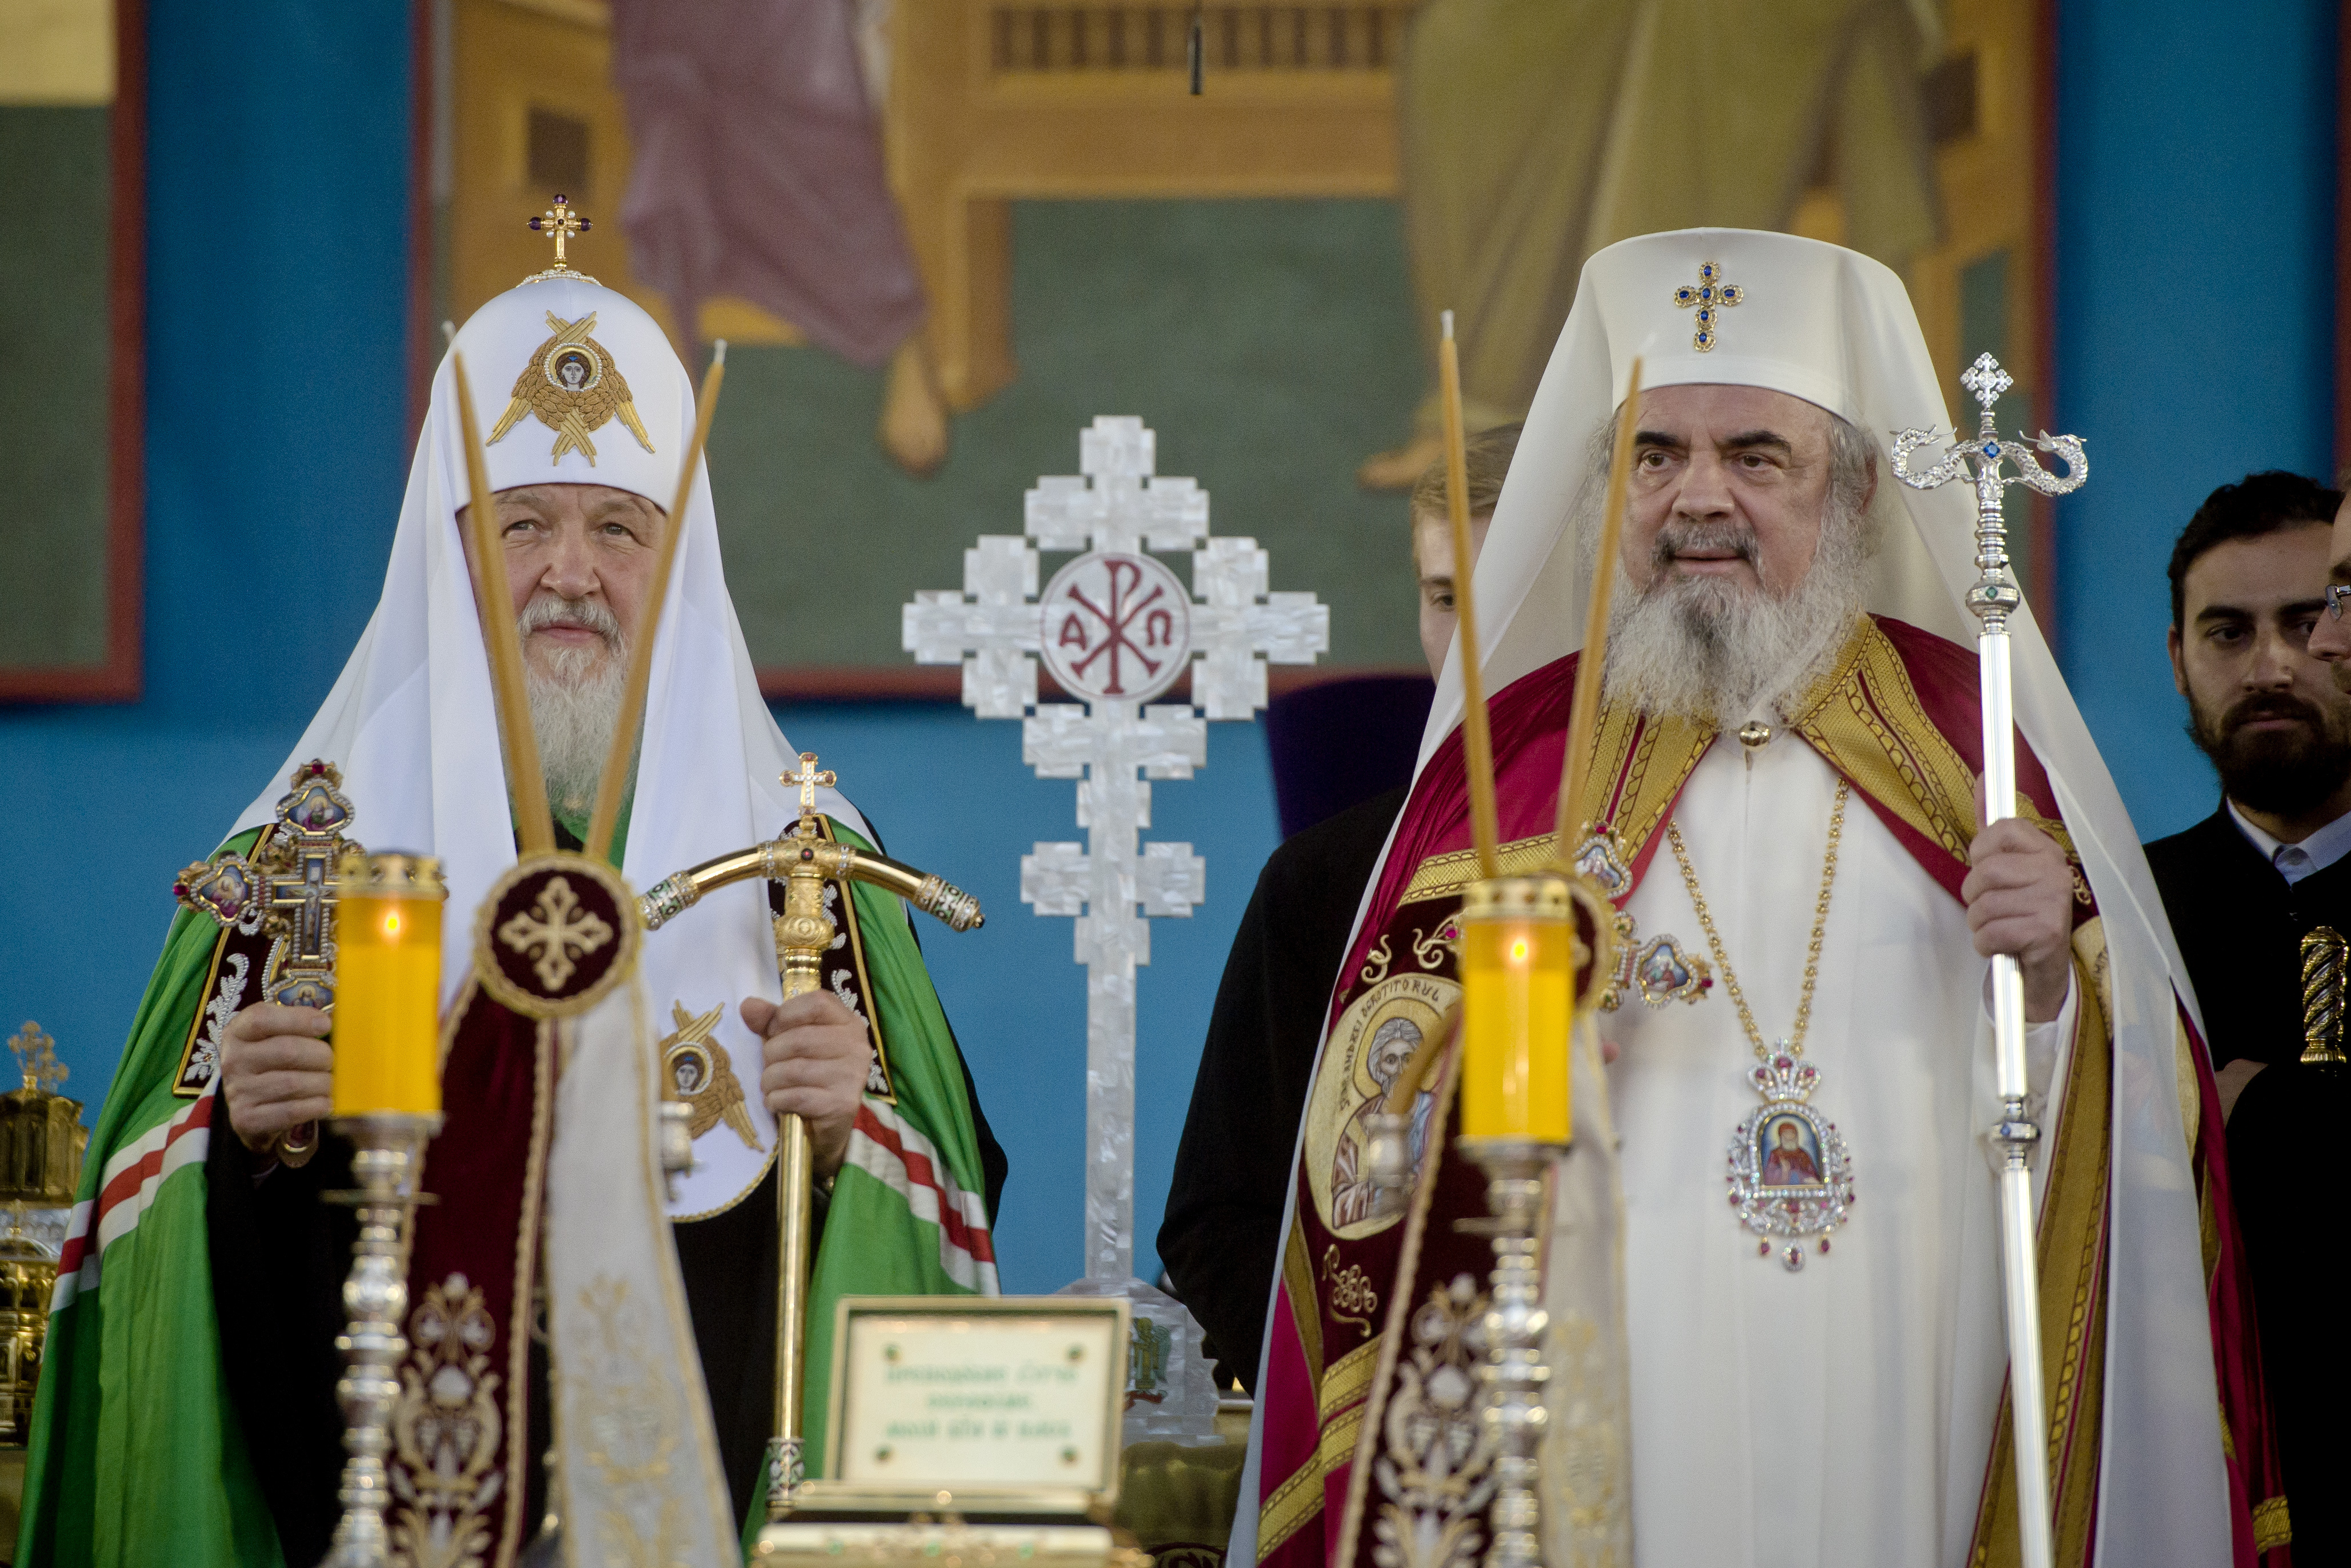 The head of the Russian Orthodox Church Patriarch Kirill, left, takes part in a religious service together with the Patriarch of Romanian Orthodox Church Daniel at the Romanian patriarchal cathedral in Bucharest, Romania, Thursday, Oct. 26, 2017. Russian Orthodox patriarch of Moscow Kirill arrived in Romania on the first visit by the head of the powerful Russian church since communism ended. (AP Photo/Andreea Alexandru)